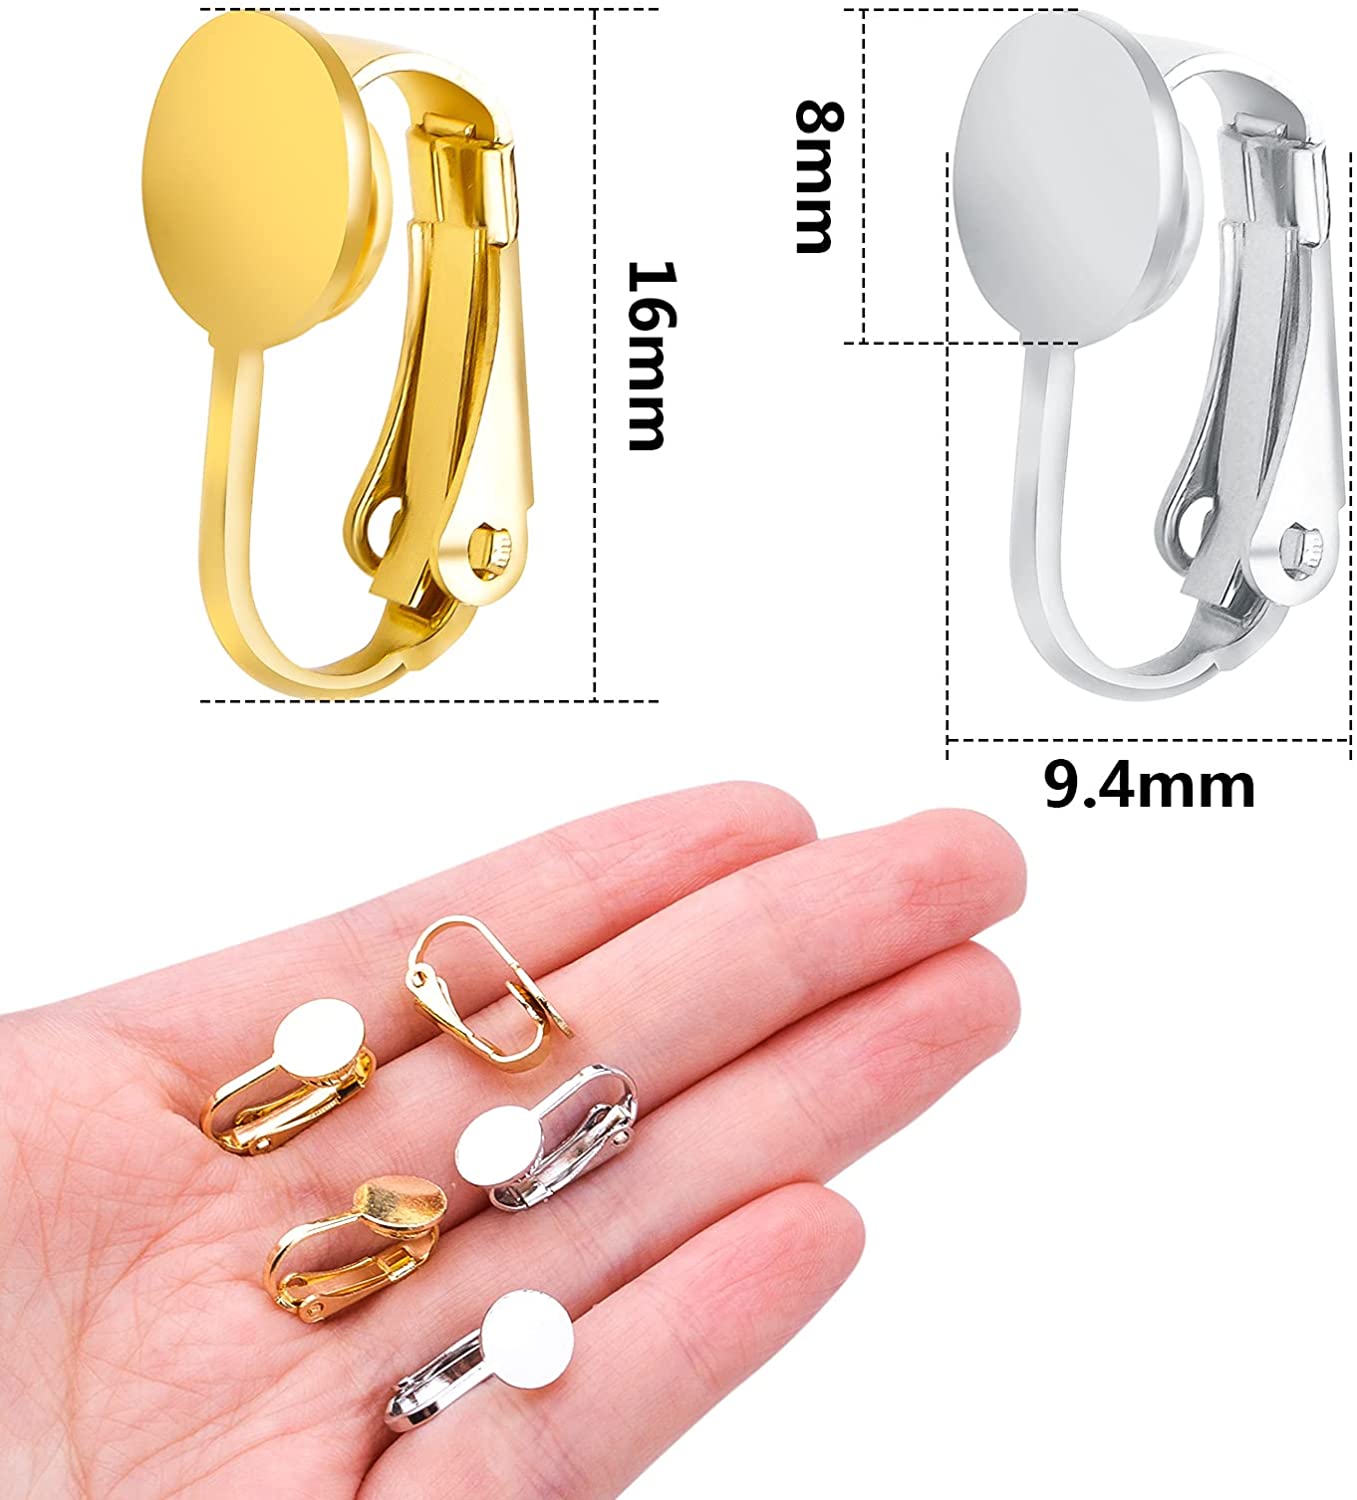 20pcs Clip-on Earring Converters Brass Round Flat Back Tray Earring Clips Components for Women Girls DIY Earrings Design Jewelry Making Findings, Gold and Silver - image 3 of 5